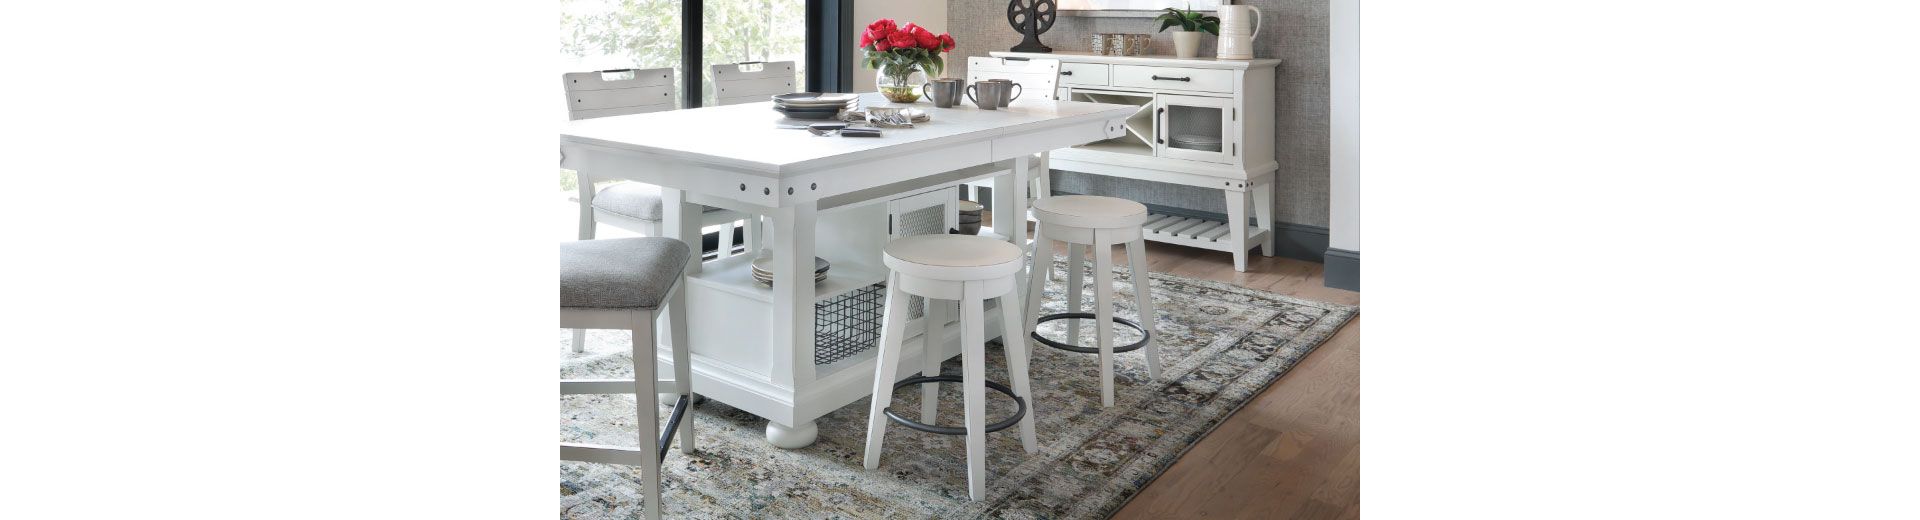 Different Types of barstools around a counter height dining set